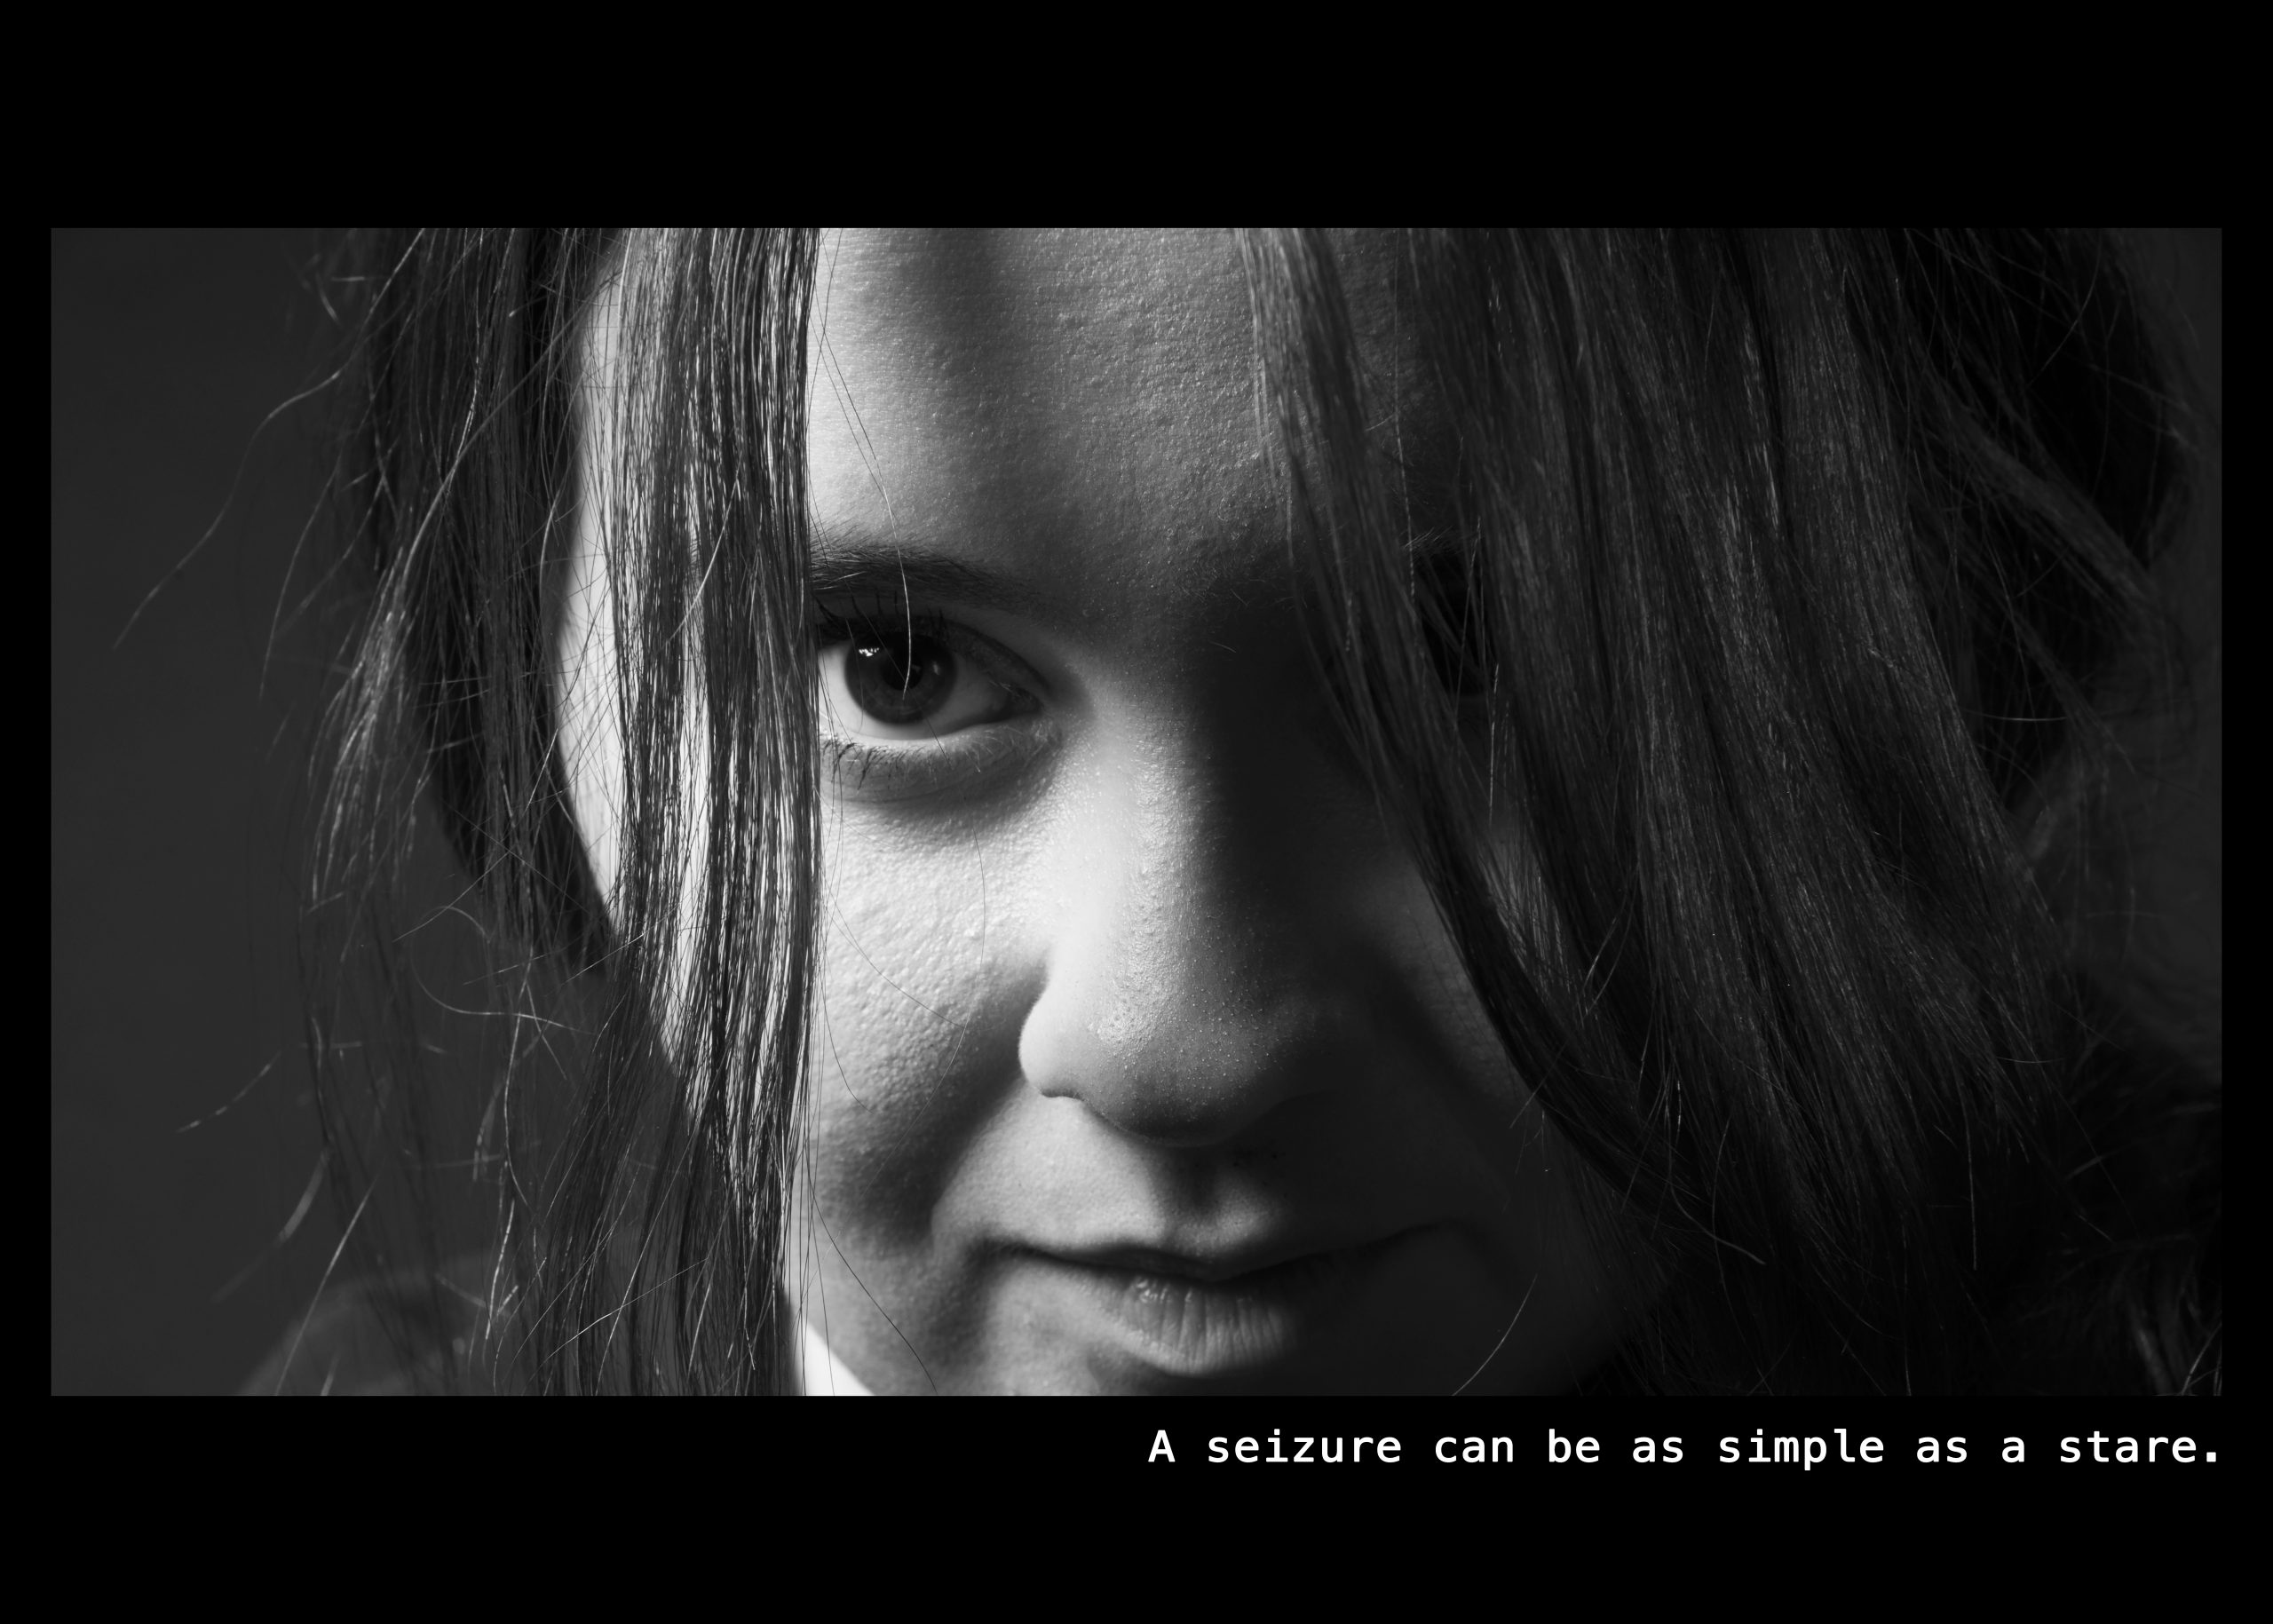 Image of a woman staring directly into the camera Text: A seizure can be as simple as a stare.